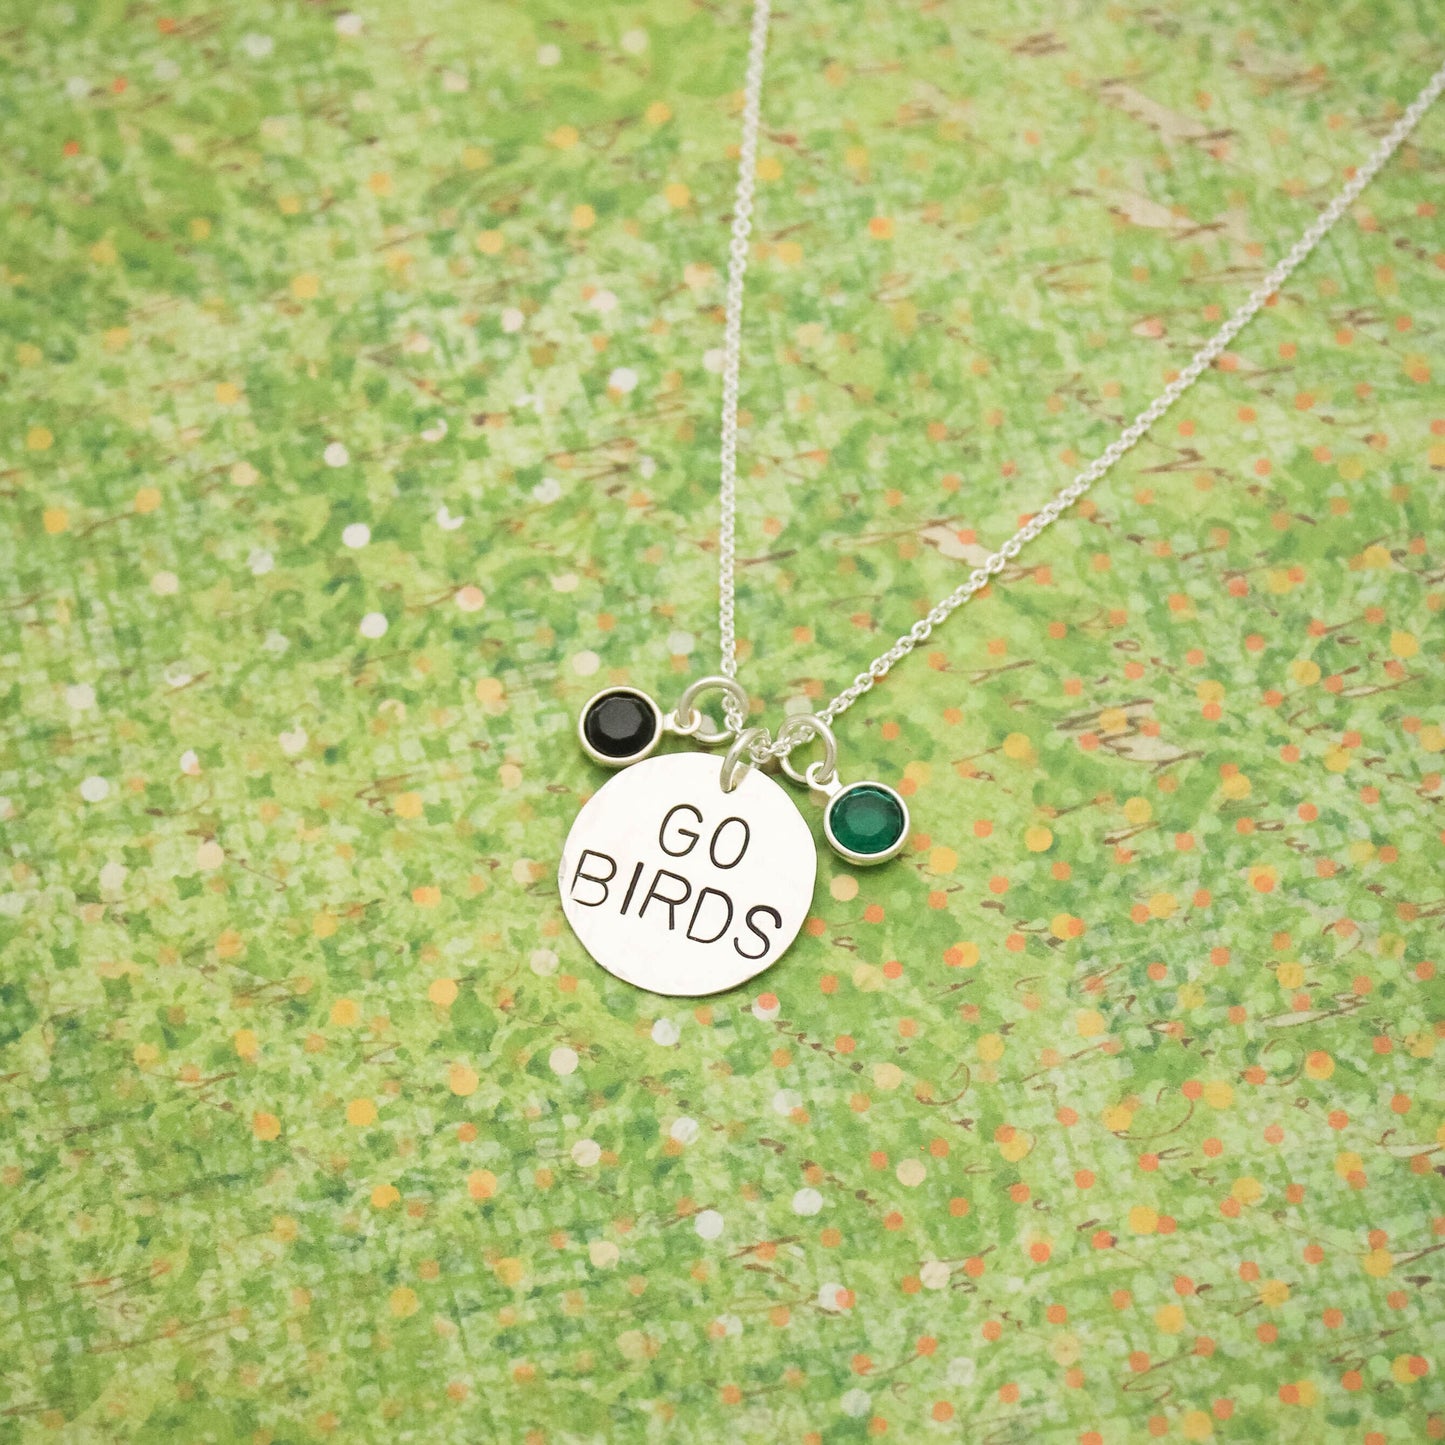 GO BIRDS Eagles Football Necklace in Sterling Silver, Game Day Eagles Jewelry, Philadelphia Eagles Necklace, Gifts for Her, Football Jewelry